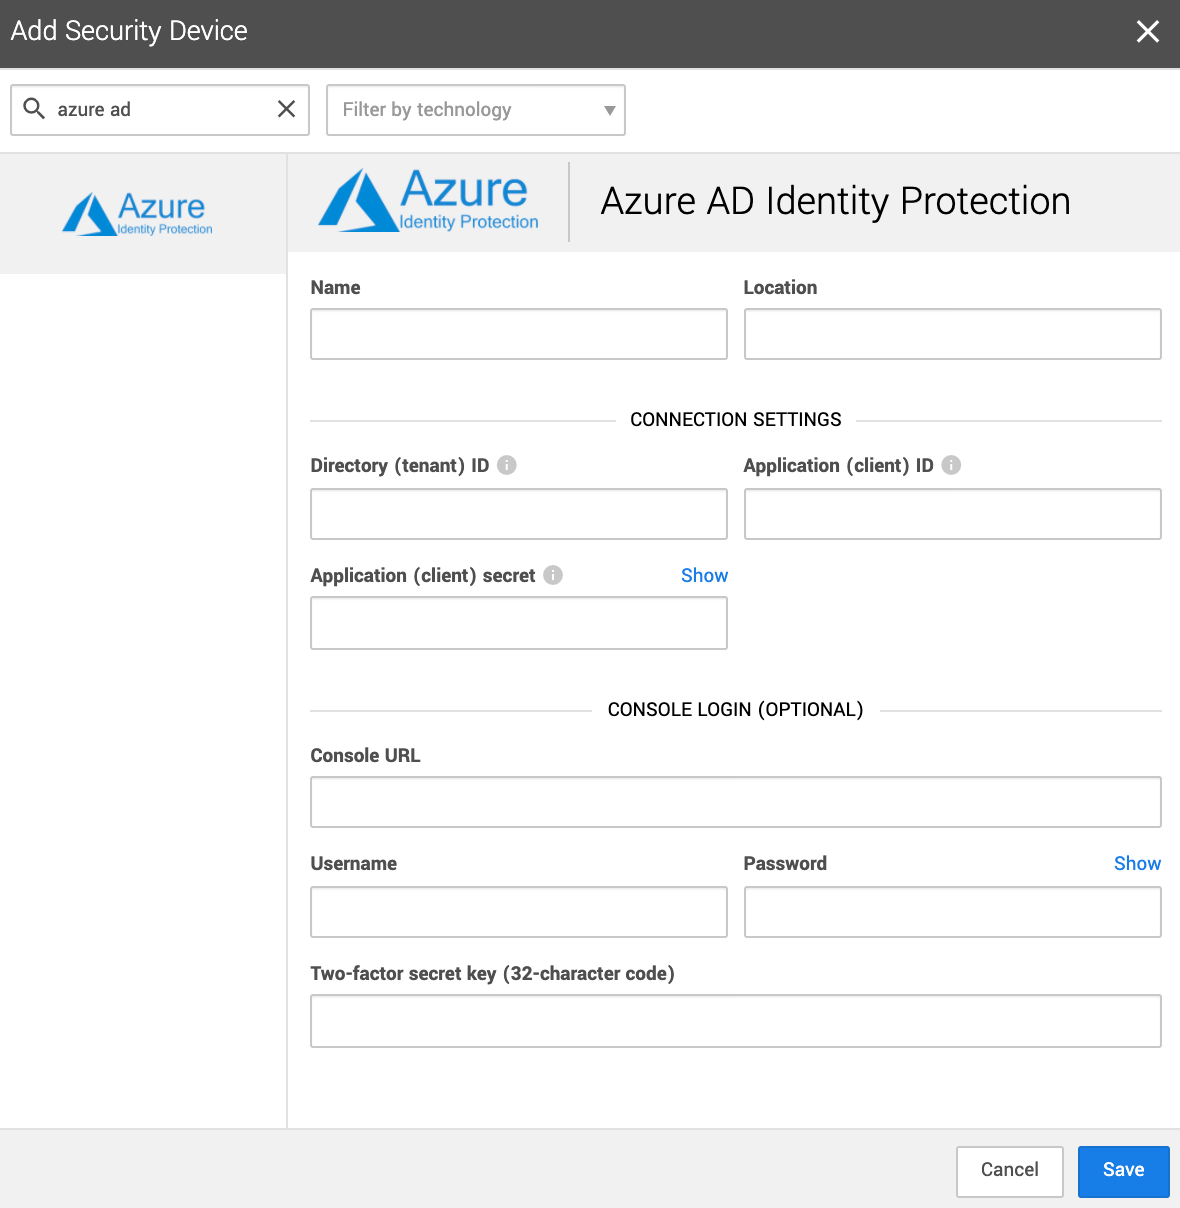 azure_ad_identity_protection_device_template.png